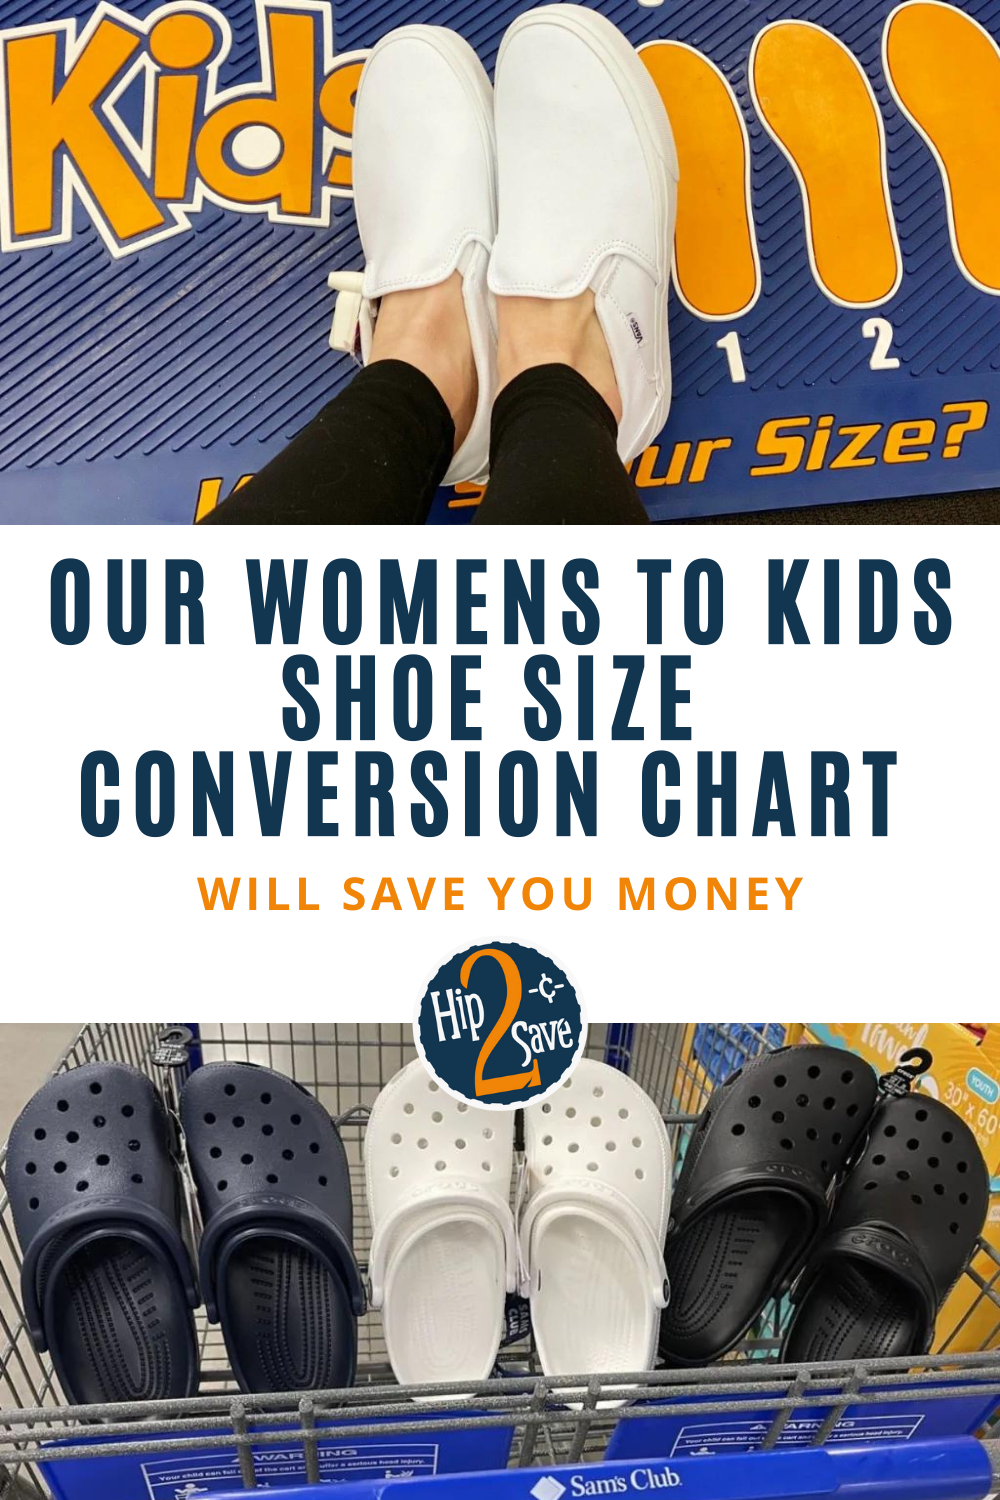 How to find the youth equivalent of women's shoe sizes